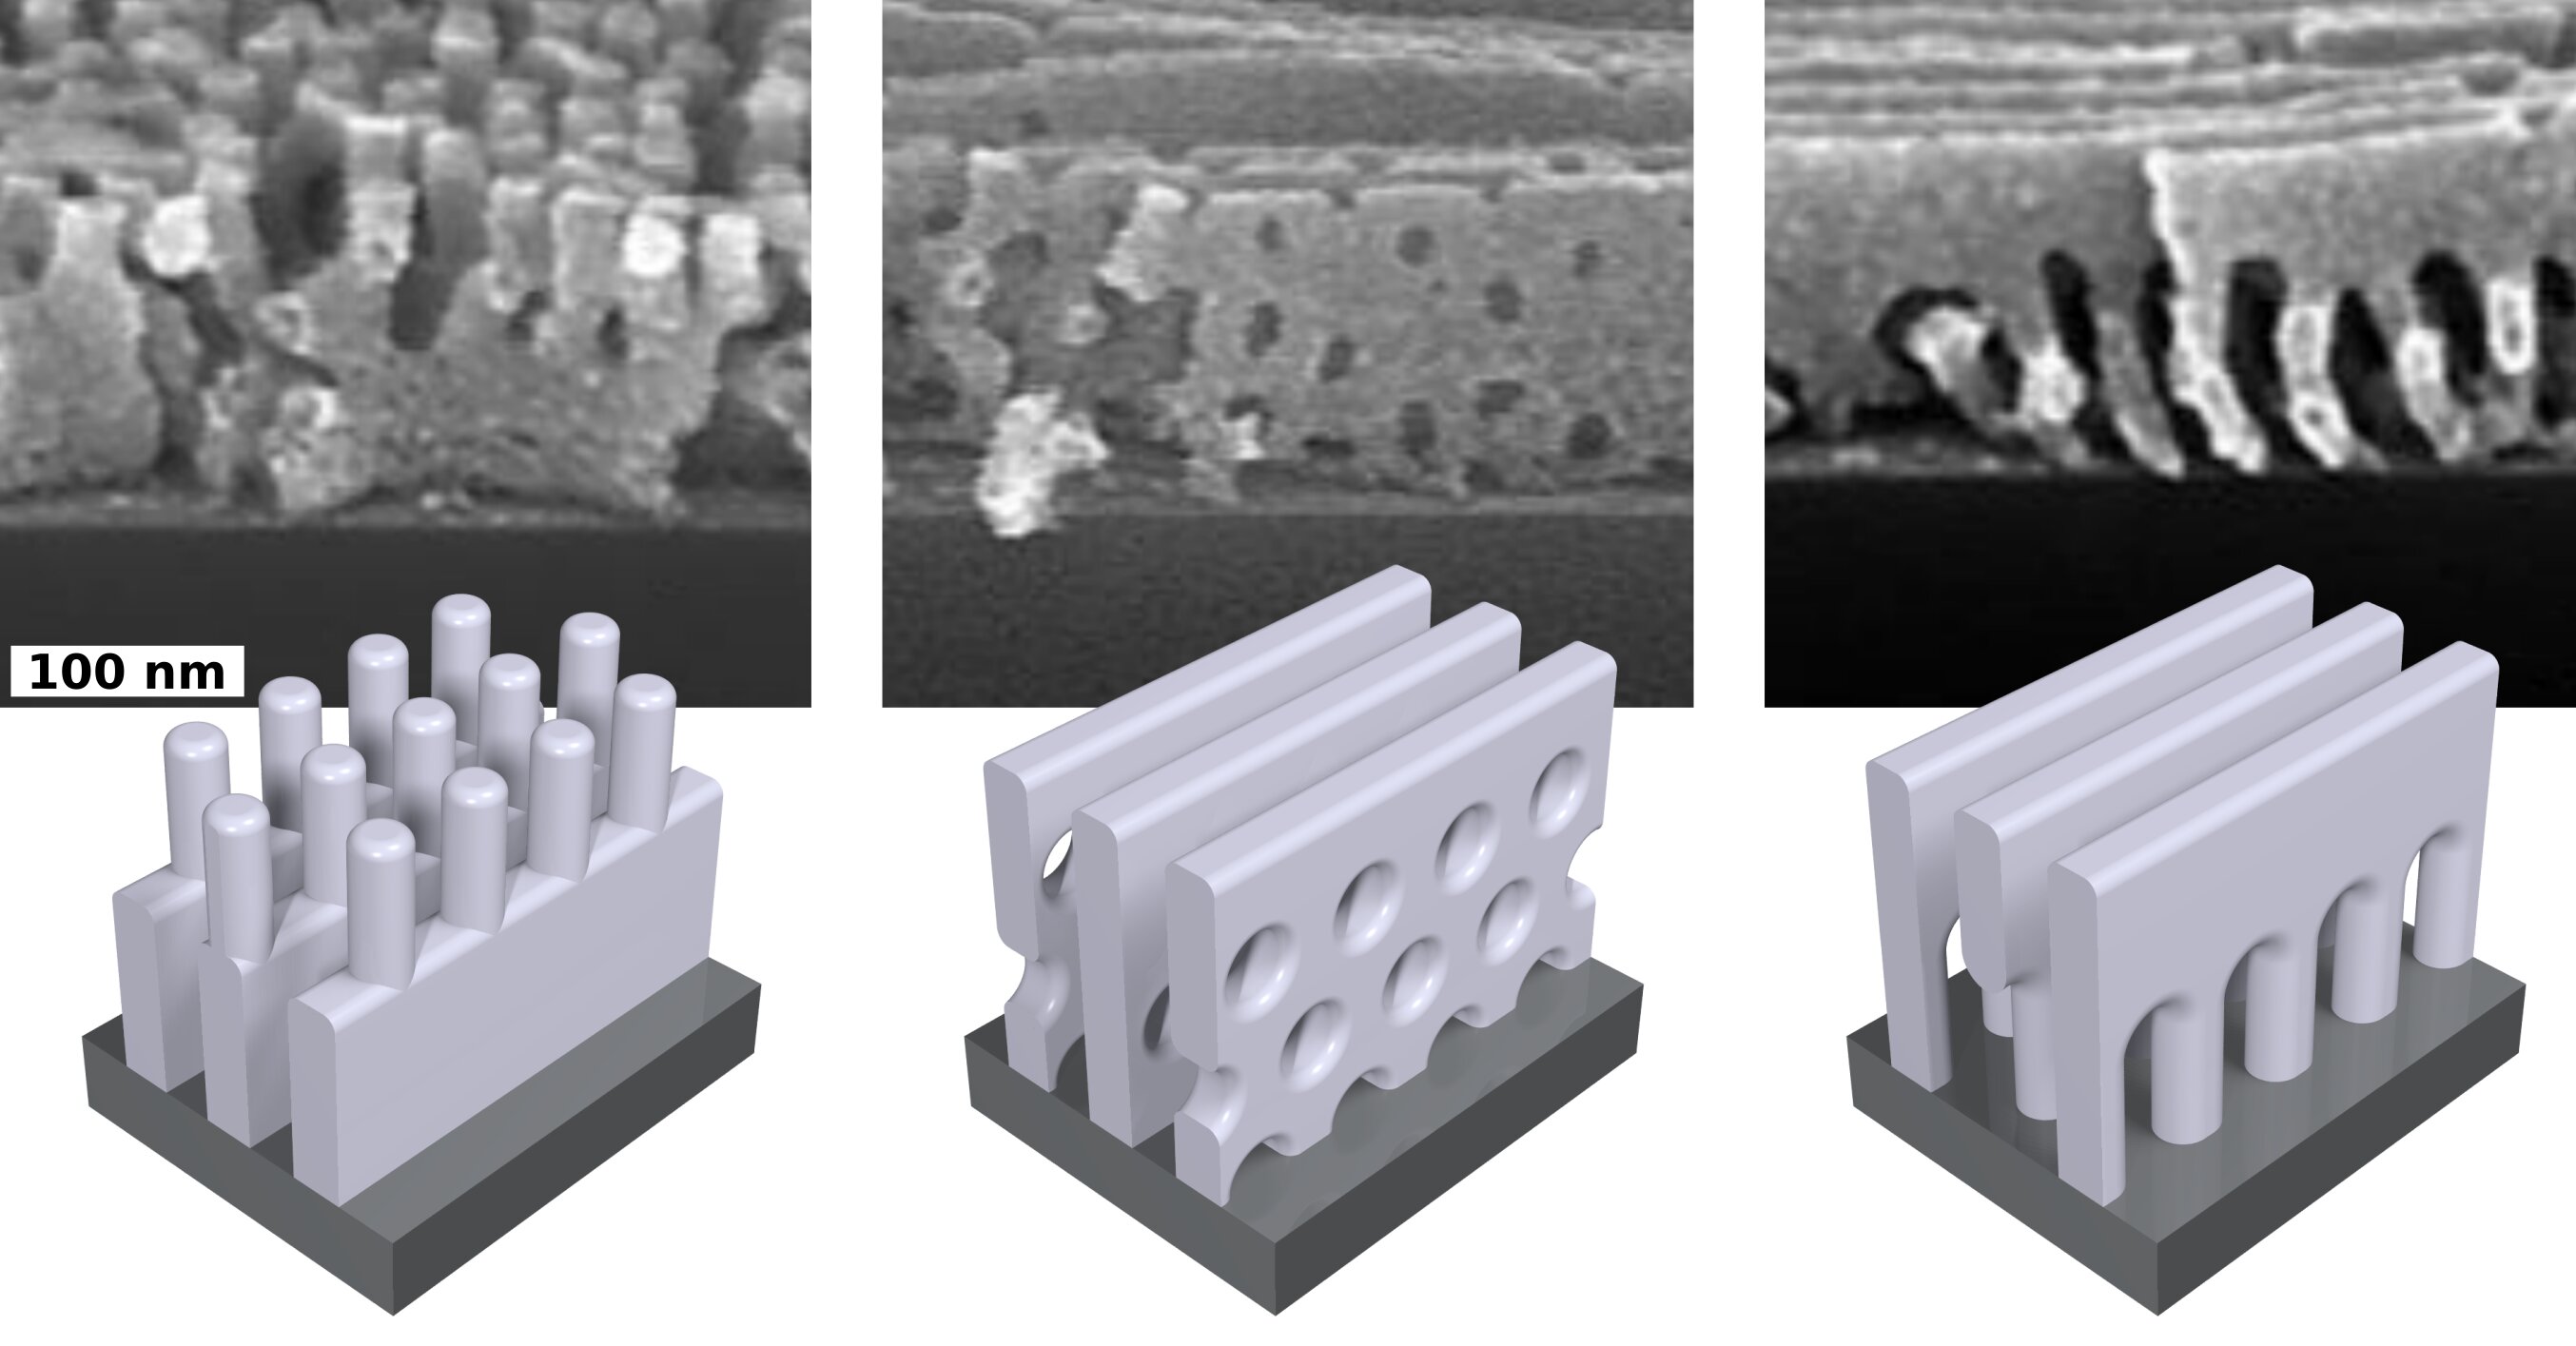 Self-assembled nanoscale architectures could feature improved electronic, optica..